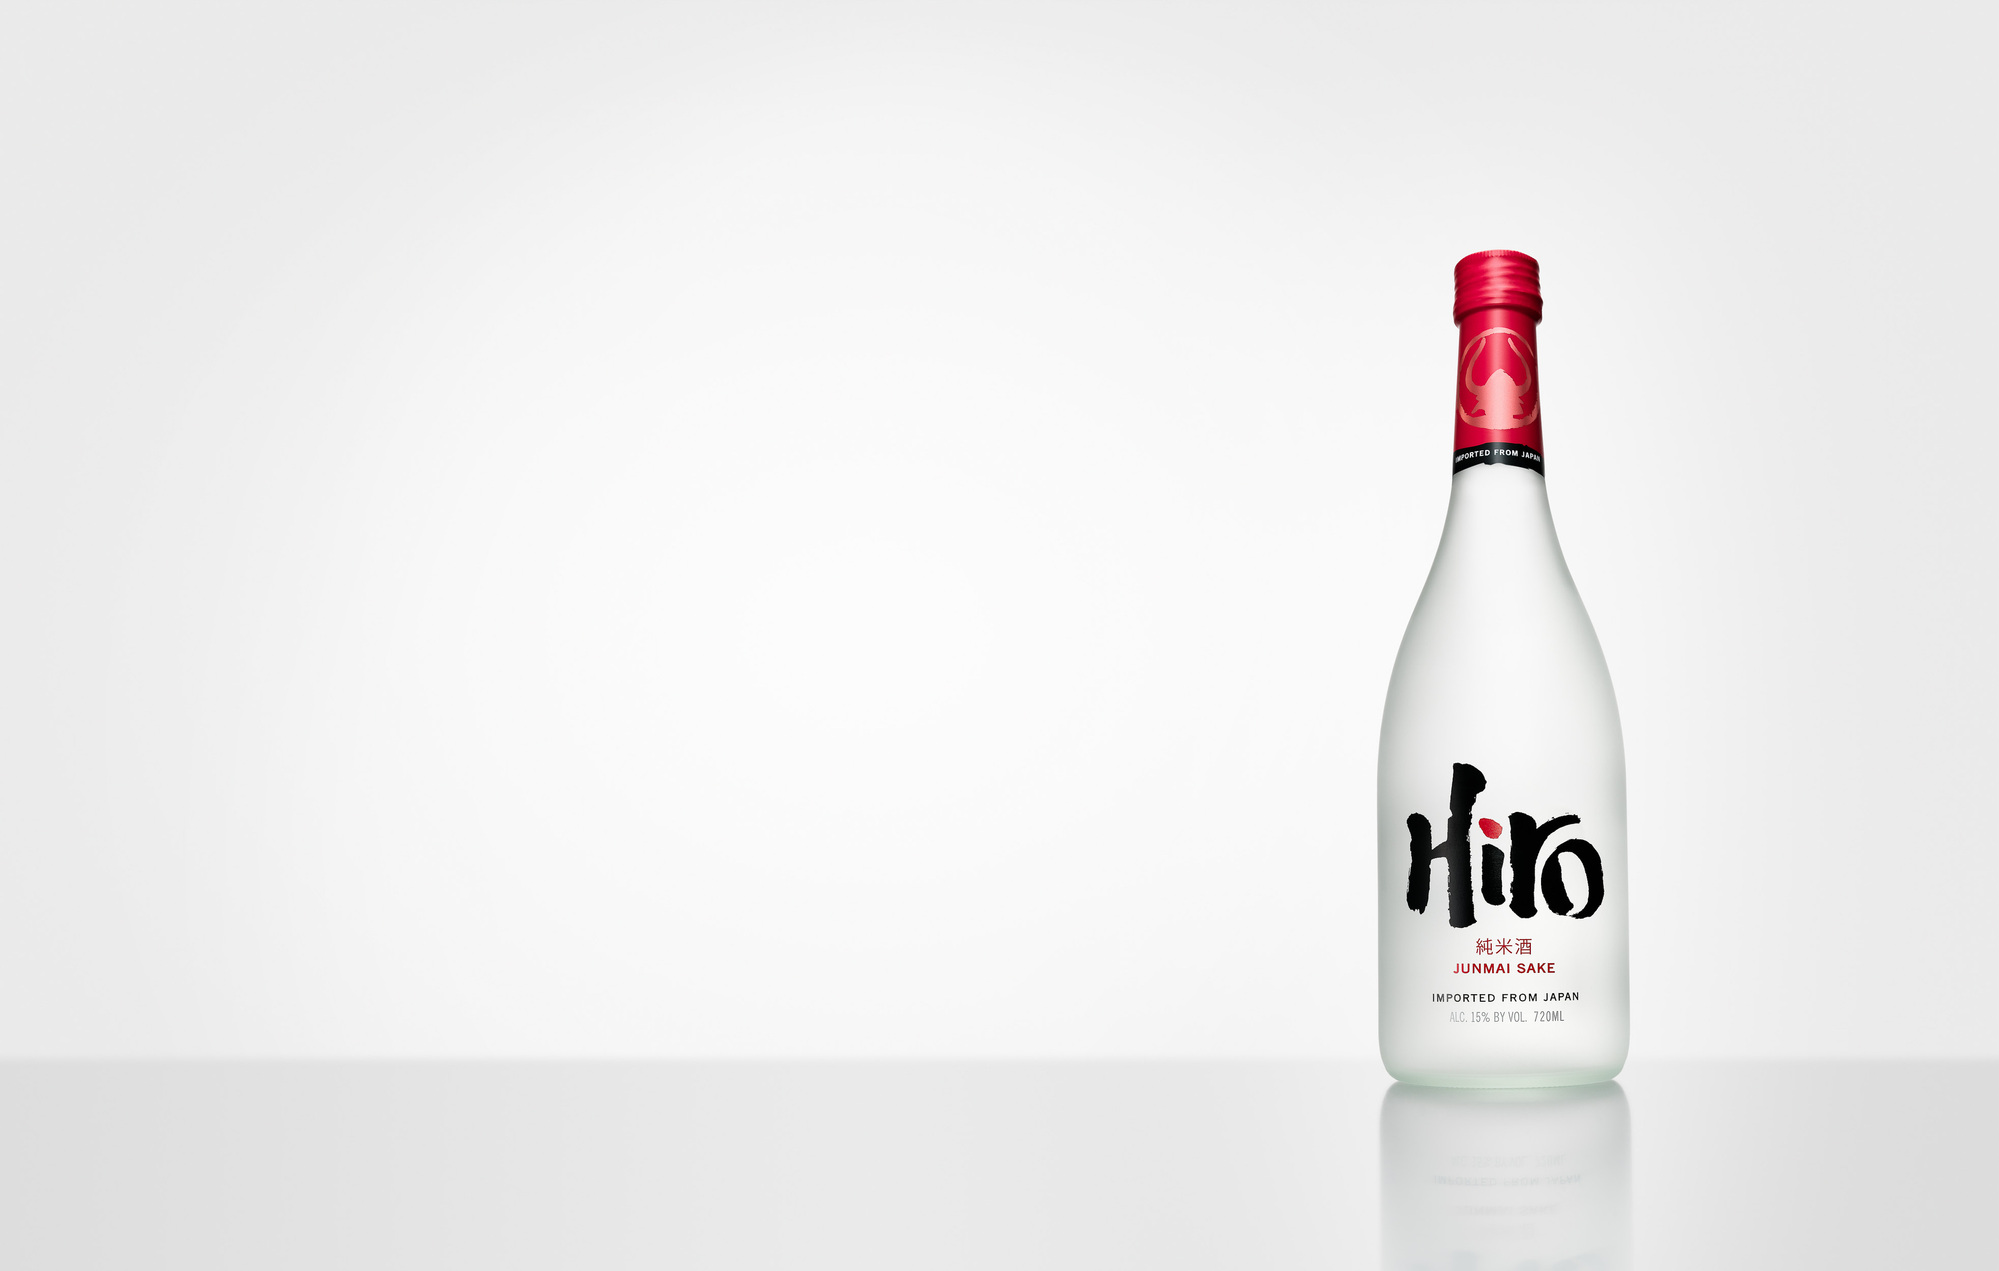 Hiro Sake Rice Wine bottle photography. Beverages and alcohol product & advertising photography by Timothy Hogan Studio in Los Angeles